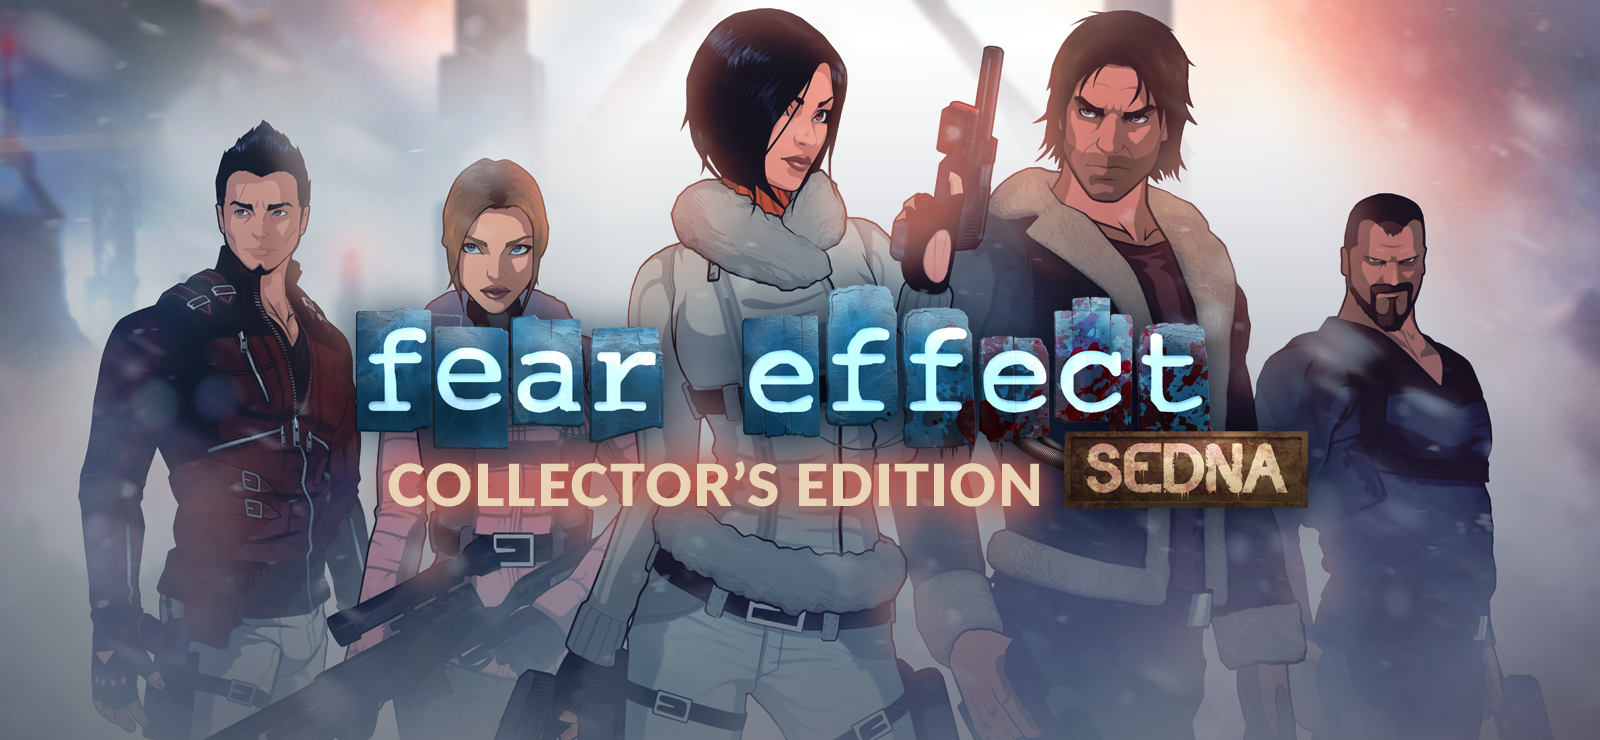 Fear Effect: Sedna Collector’s Edition